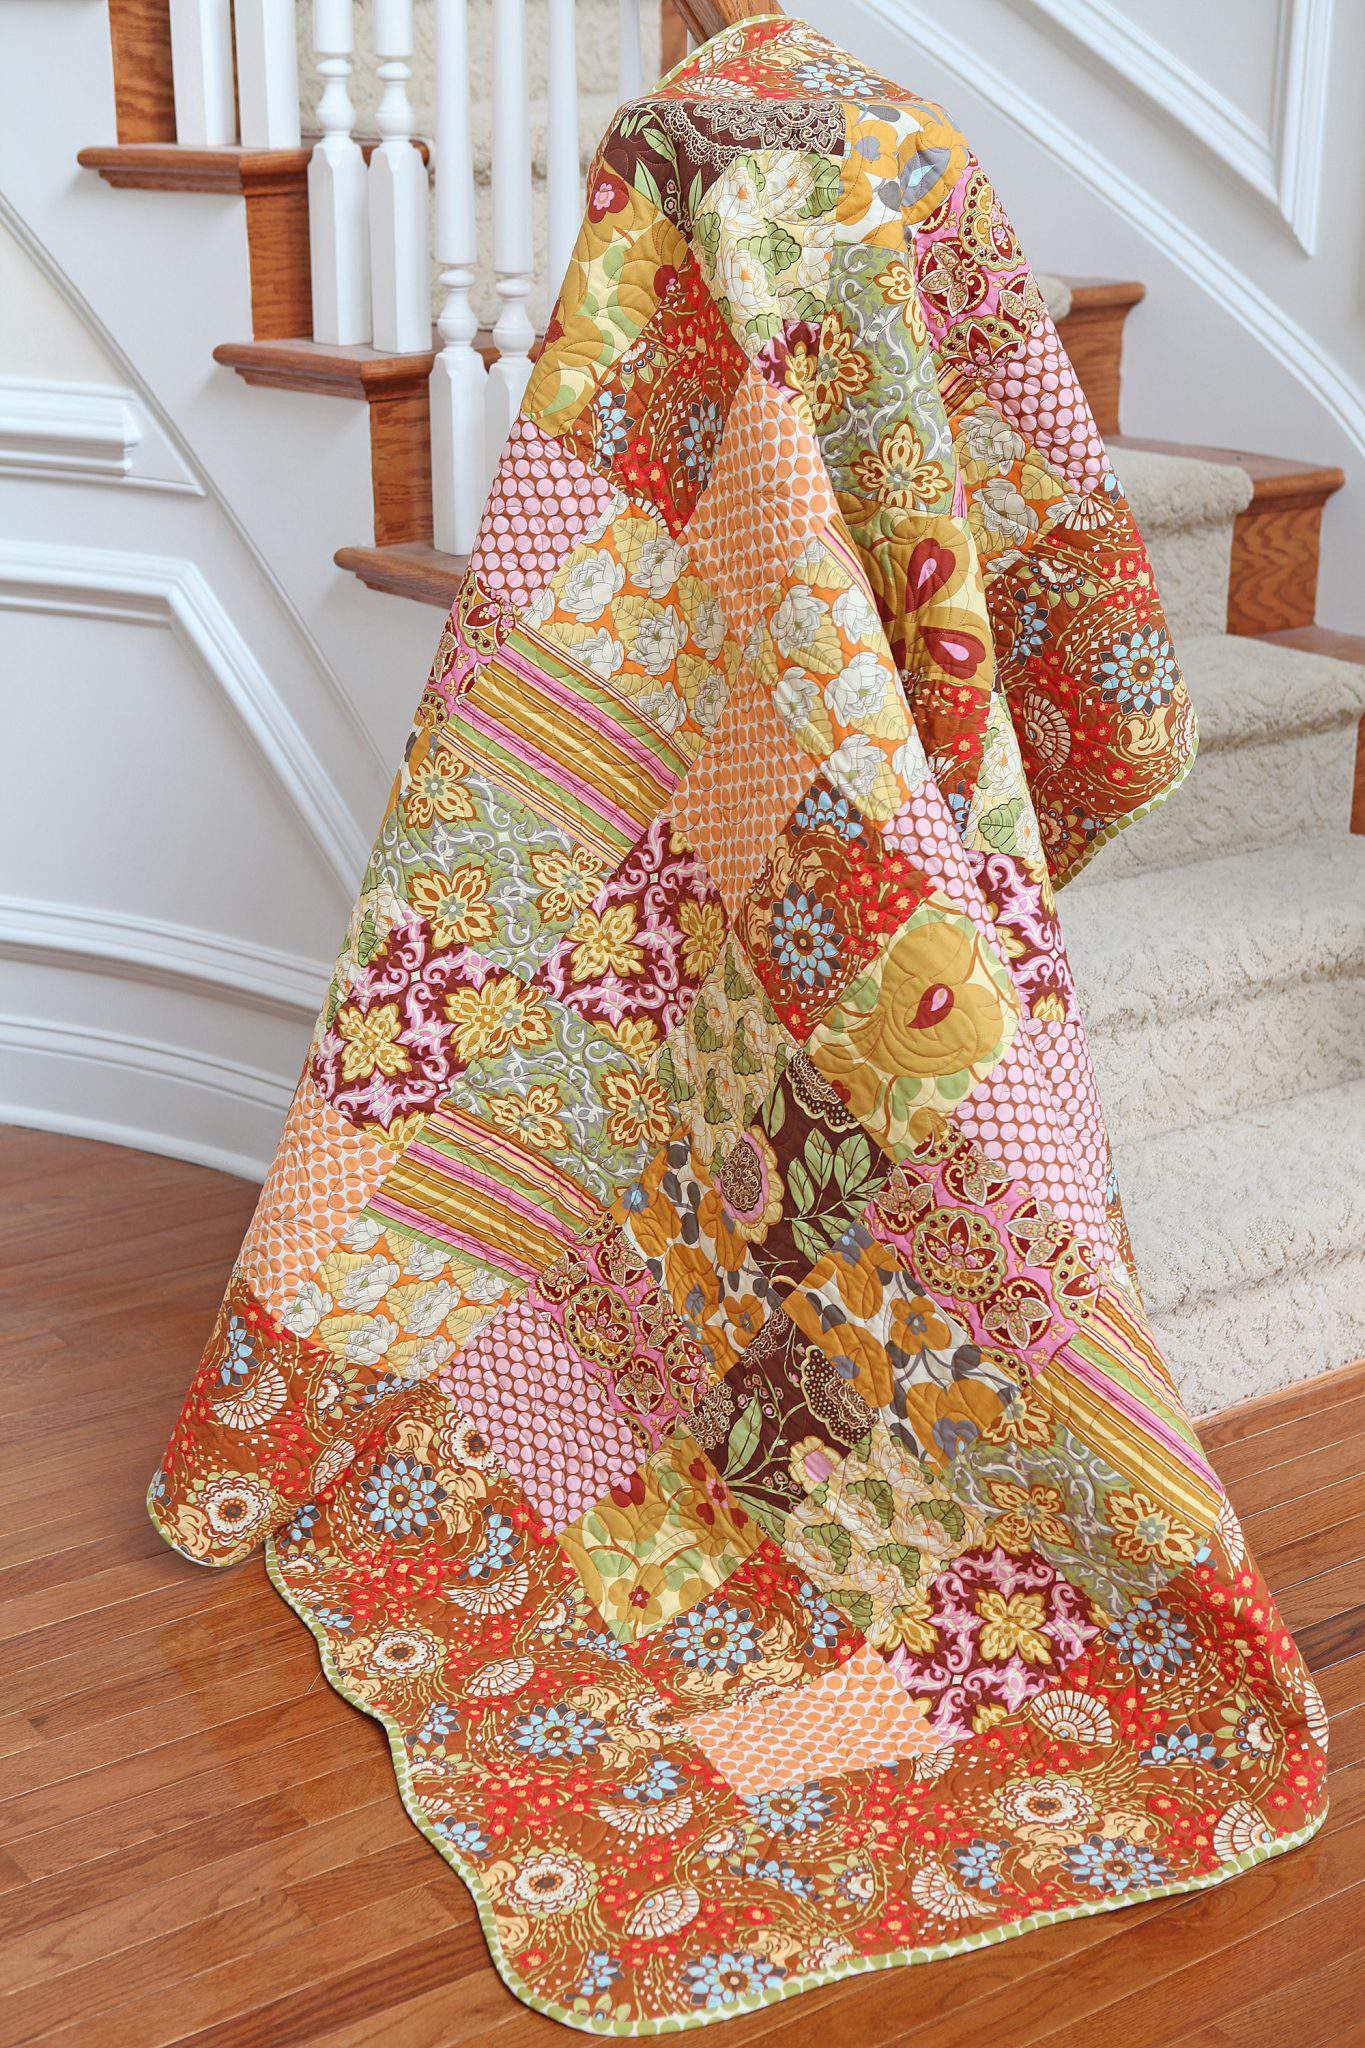 New Year Quilting Skills: Get Ready for Your Year of Quilting